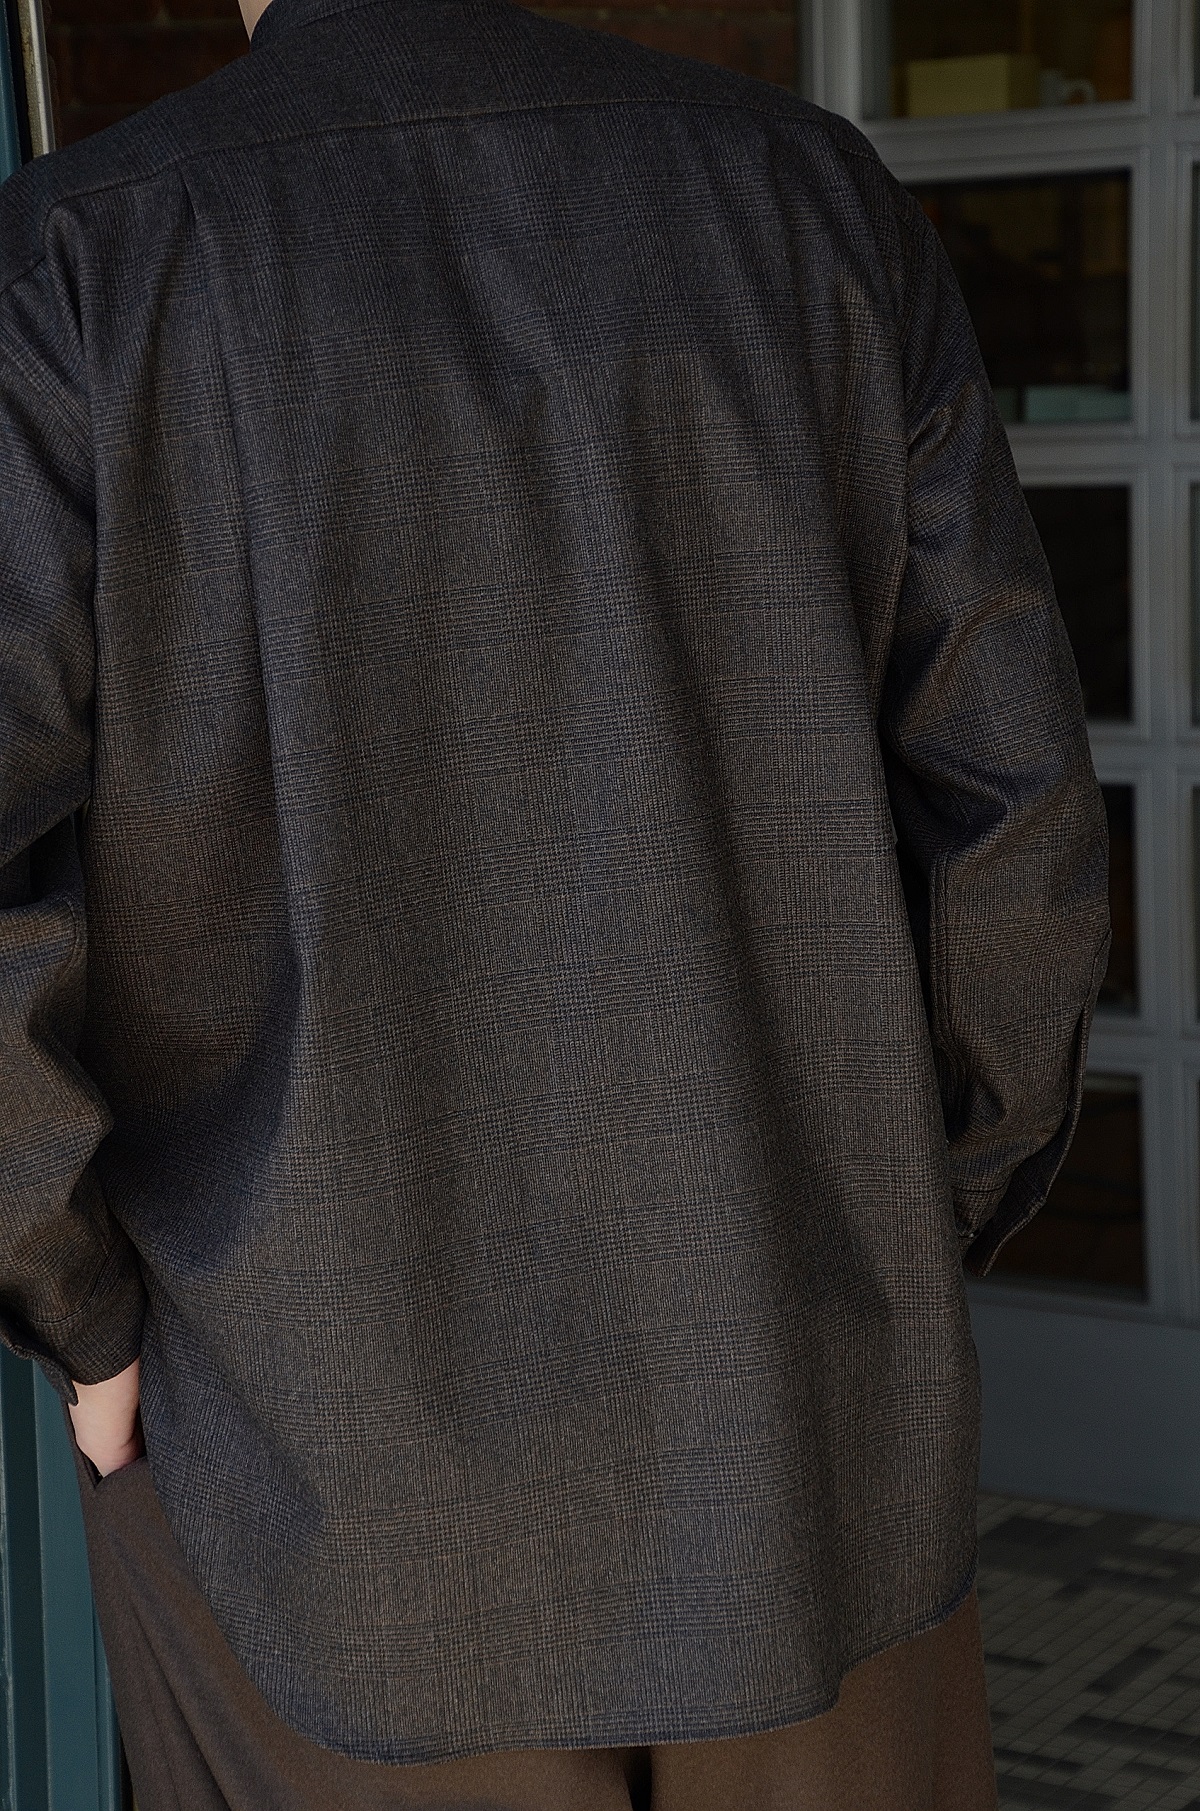 WEWILL ウィーウィル BAND COLLAR DT SHIRT Brown i